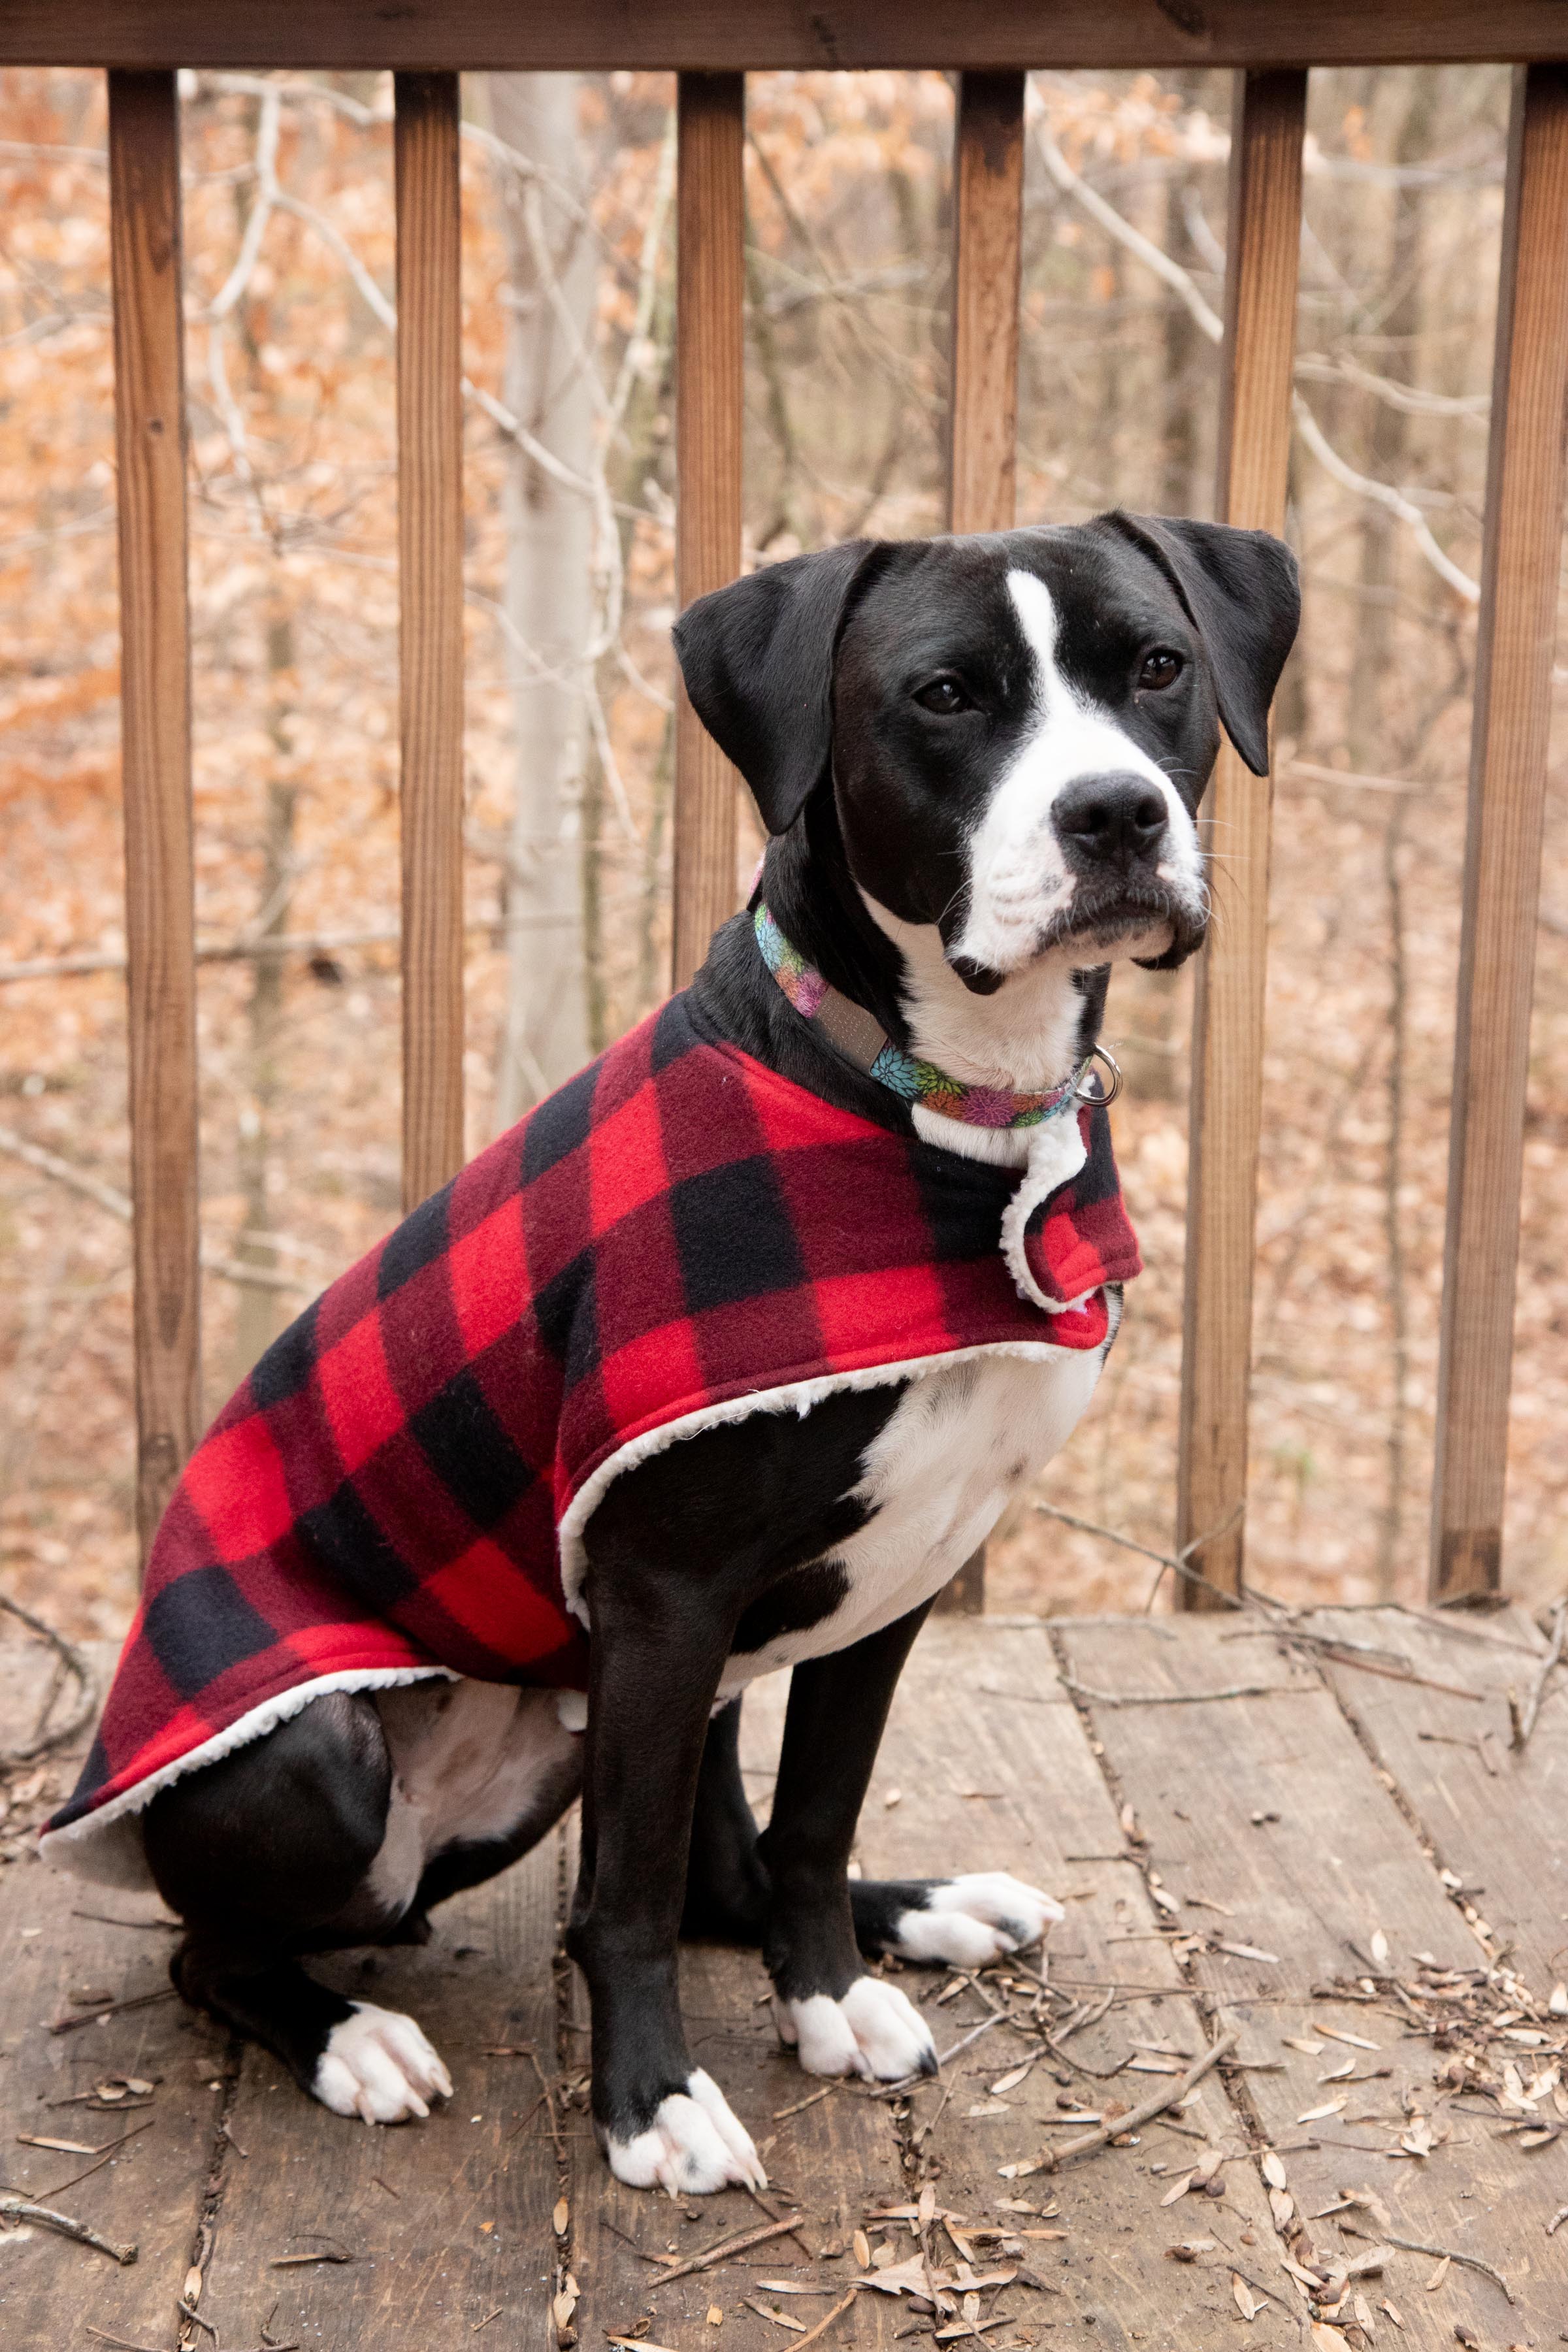 Red and White Dog Logo - How to Sew a Cozy Custom Dog Coat in Less than an Hour | Wholefully